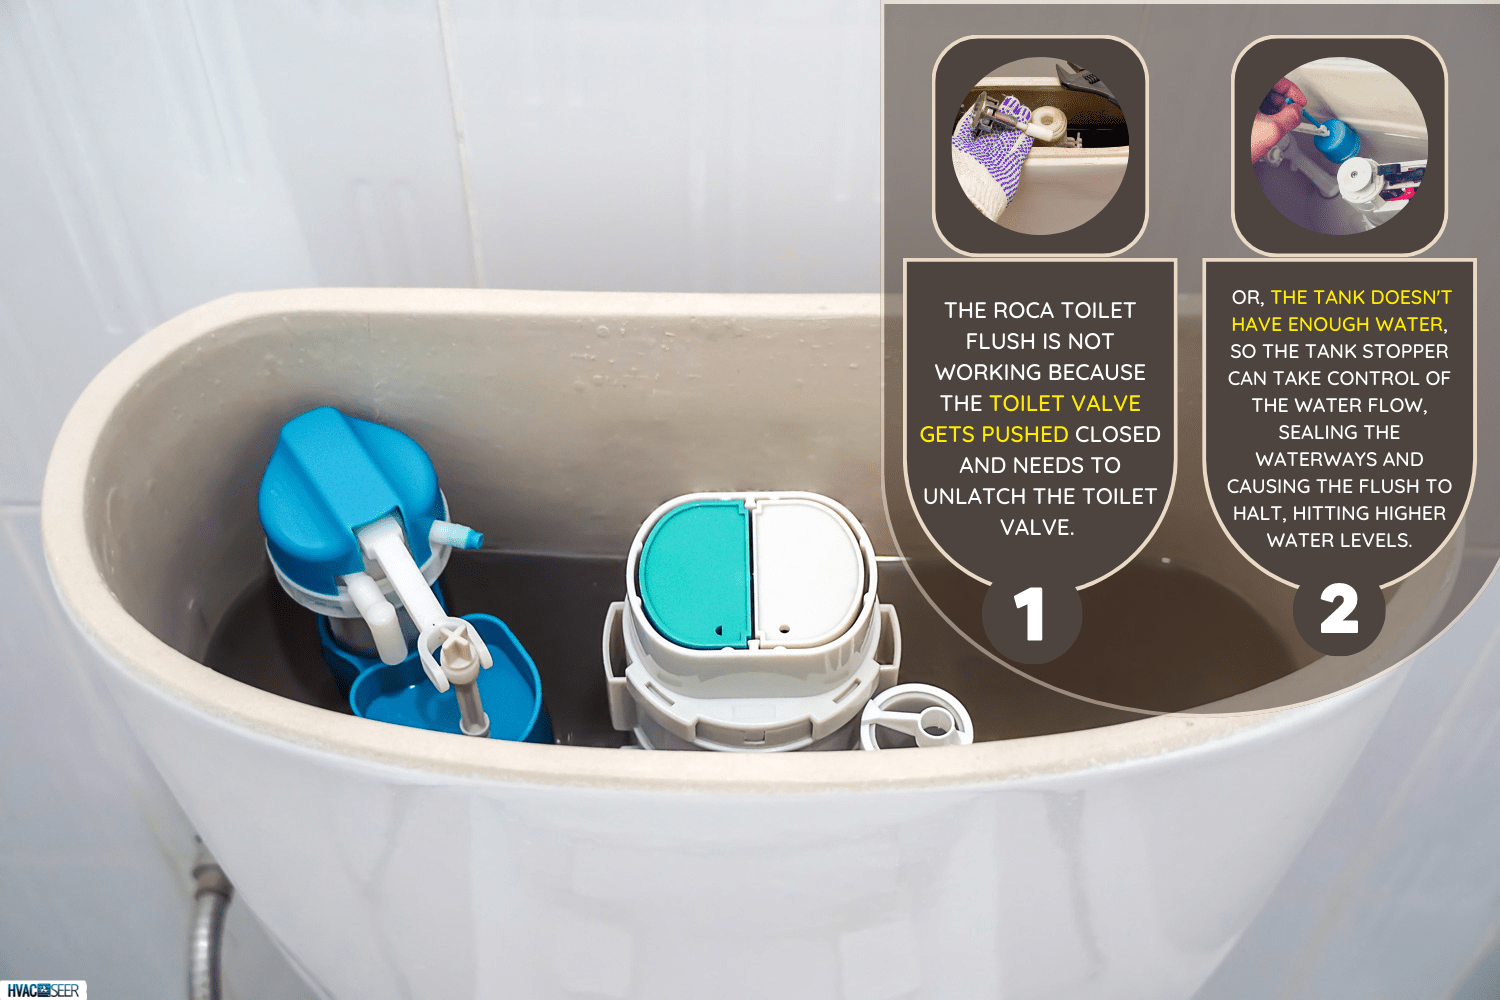 open toilet tank,repair toilet toilet tank that drains water, old toilet,Water valve mechanism - Roca Toilet Flush Not Working - Why And What To Do